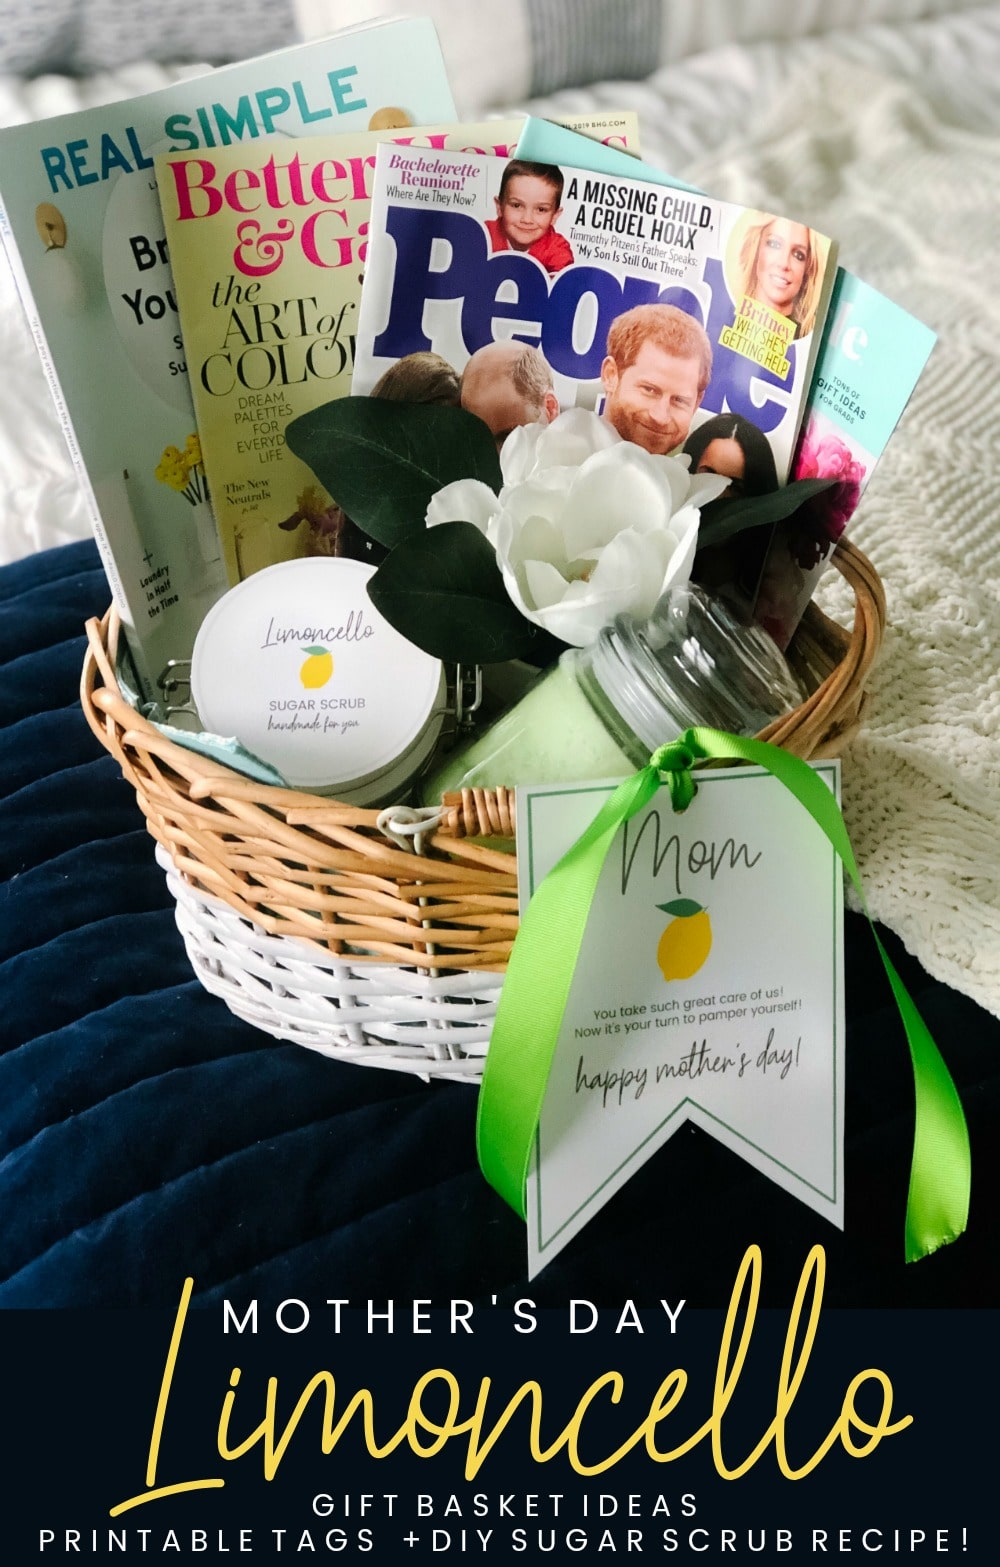 Mother's Day Gift Basket Ideas, Printable Gift Tags + DIY Limoncello Sugar Scrub Recipe! Mother's Day is the perfect time to show someone how much you care! Put together an easy gift basket of things to pamper mom, including some yummy Limoncello Sugar Scrub and a cute tag you can print off!